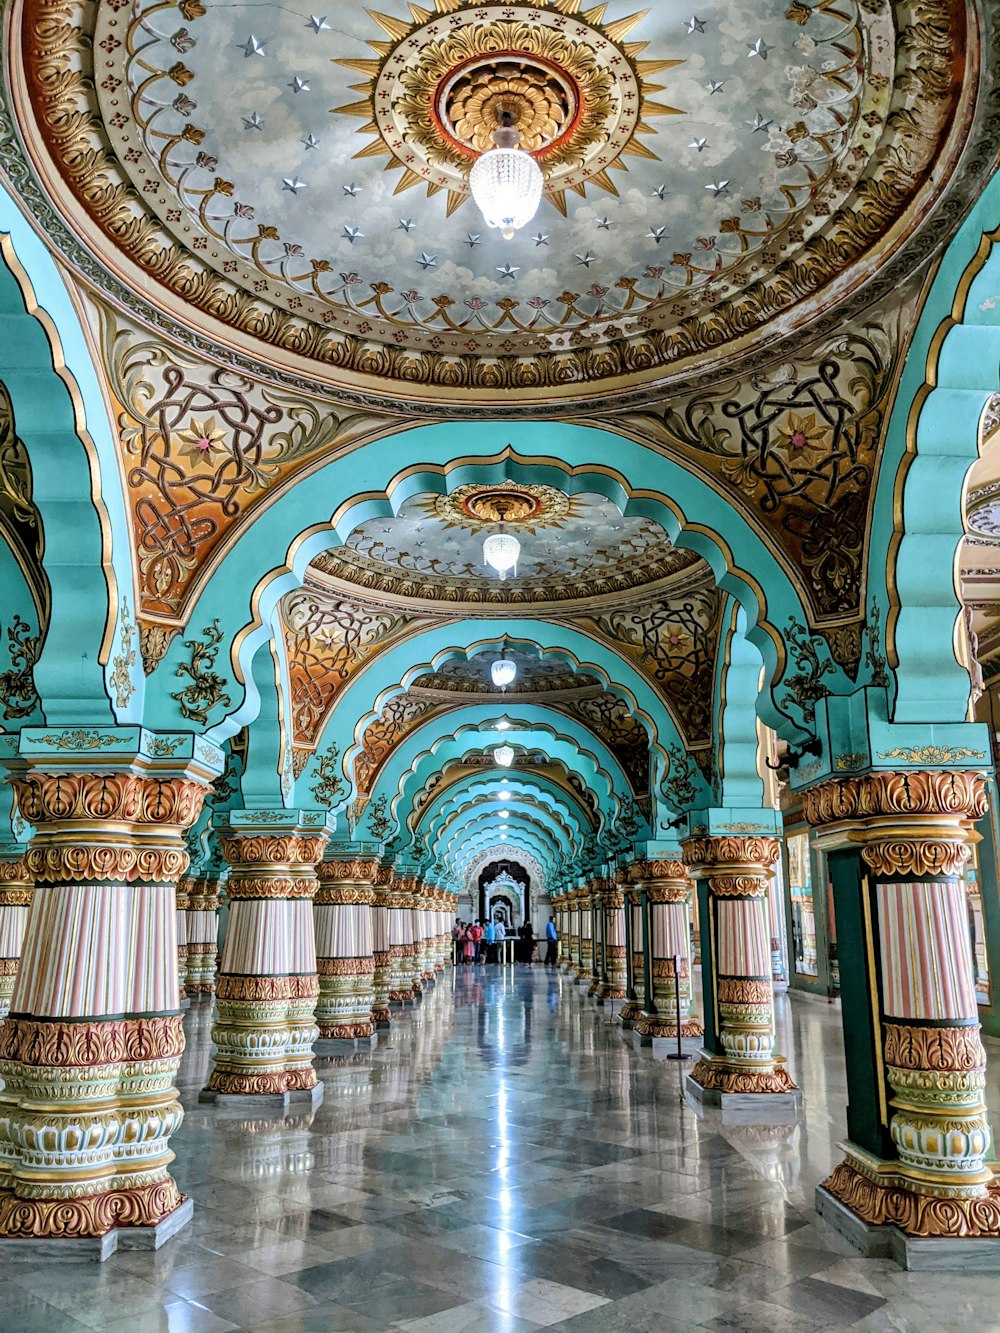 a long hallway with columns and a domed ceiling